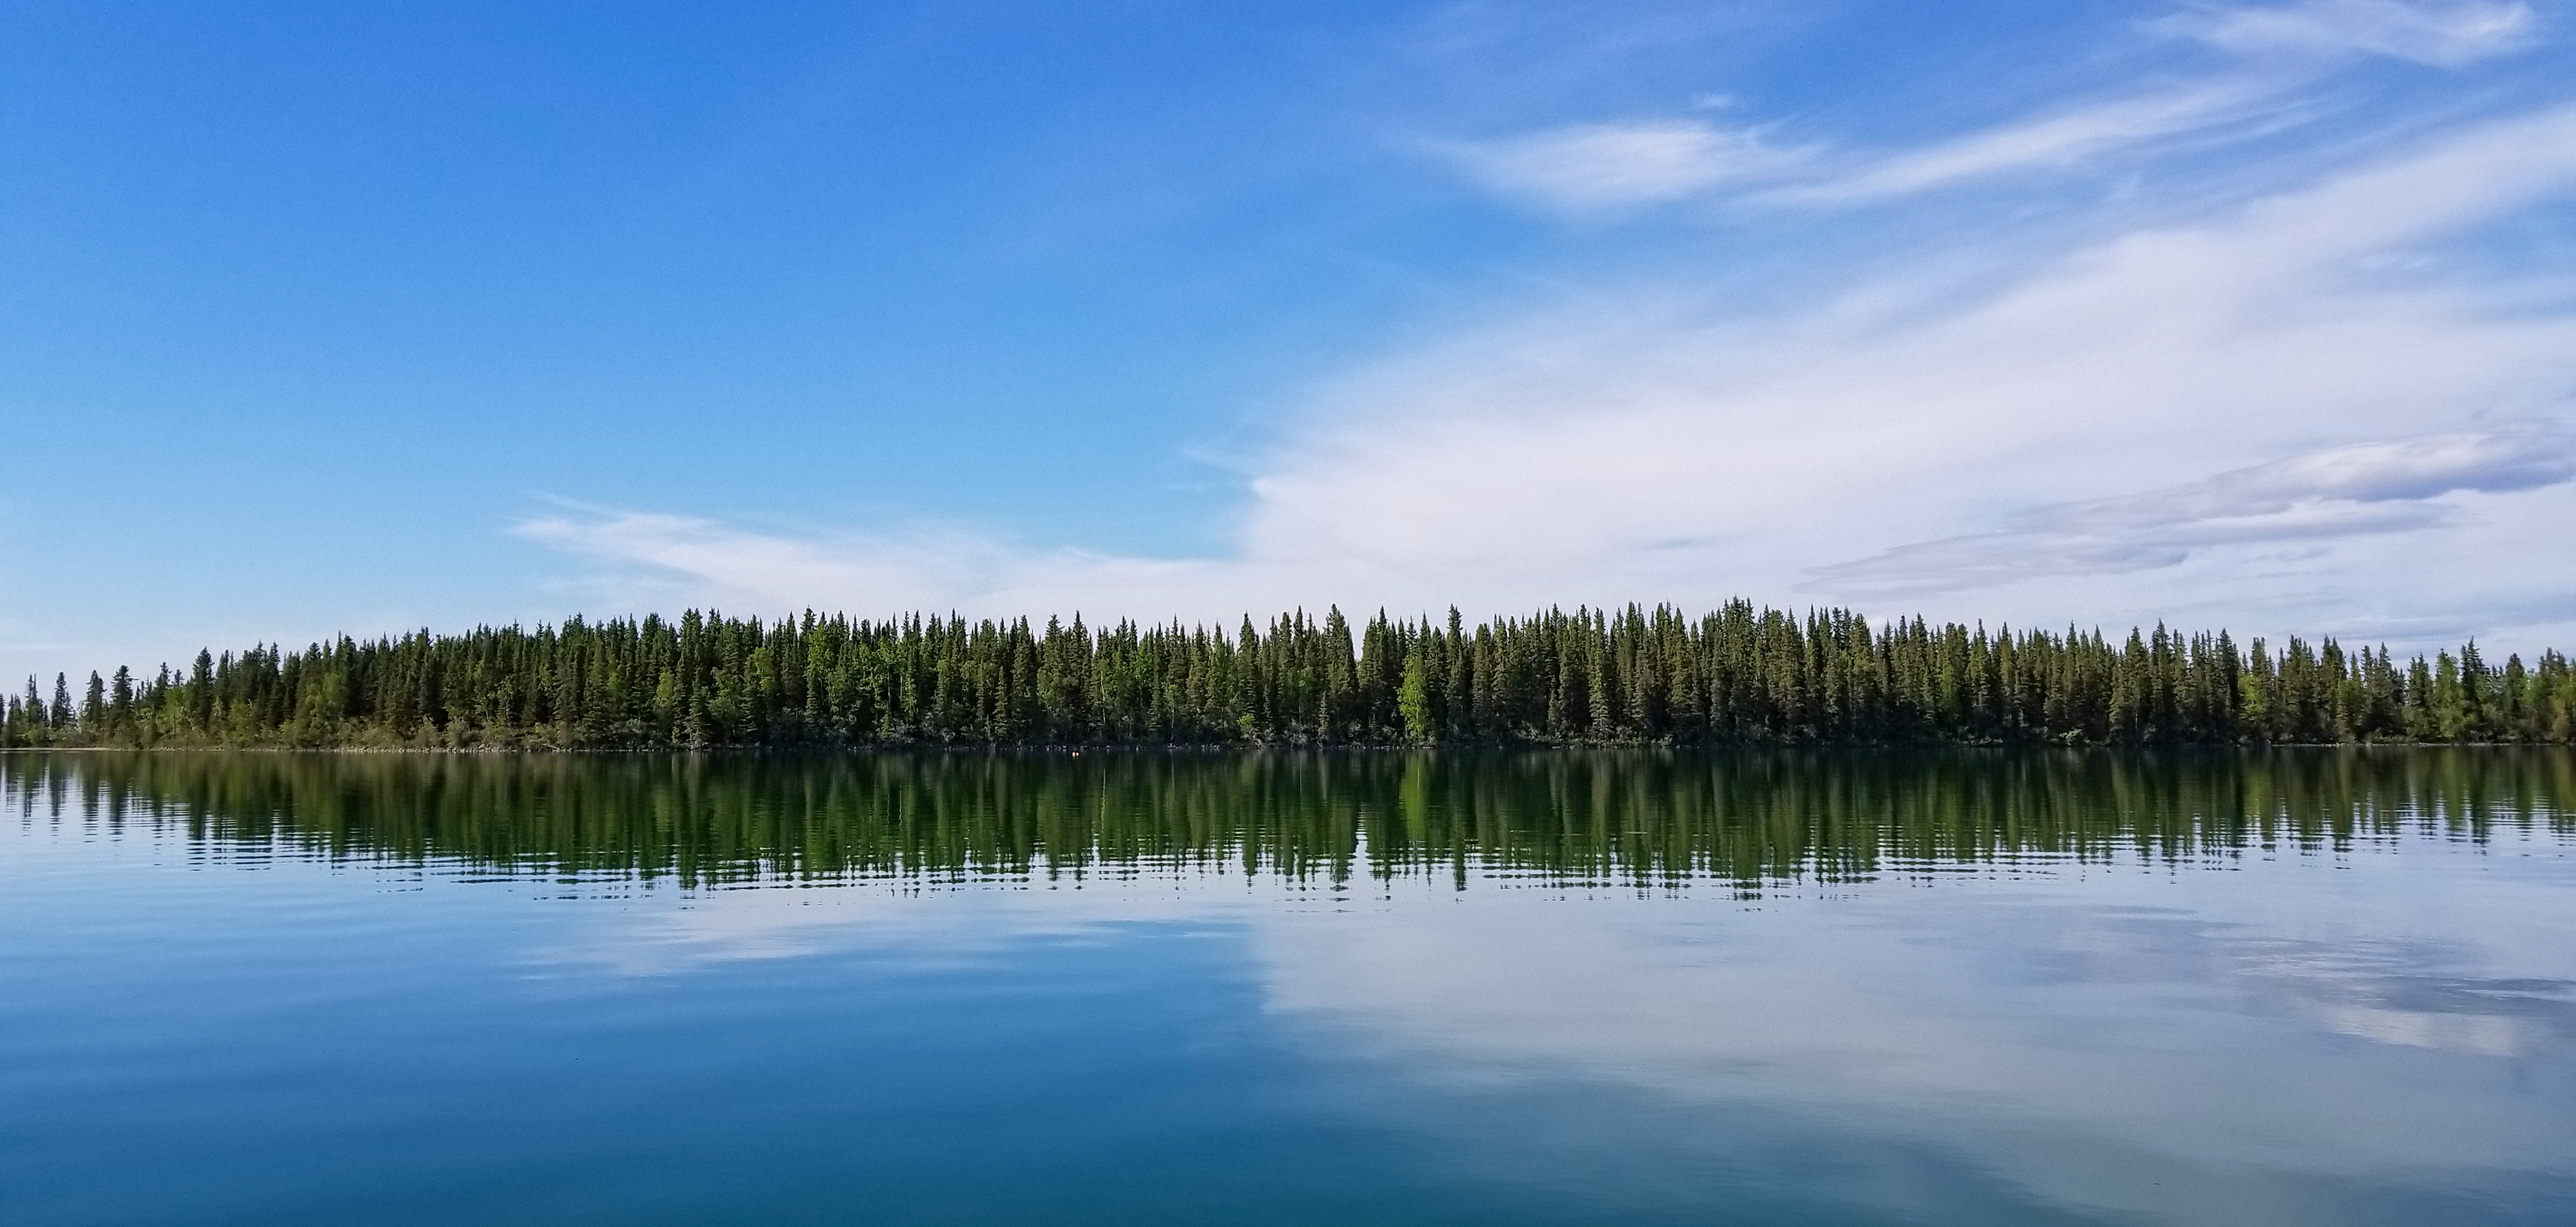 Blue skies, trees on the other side of a lake, reflected in the water